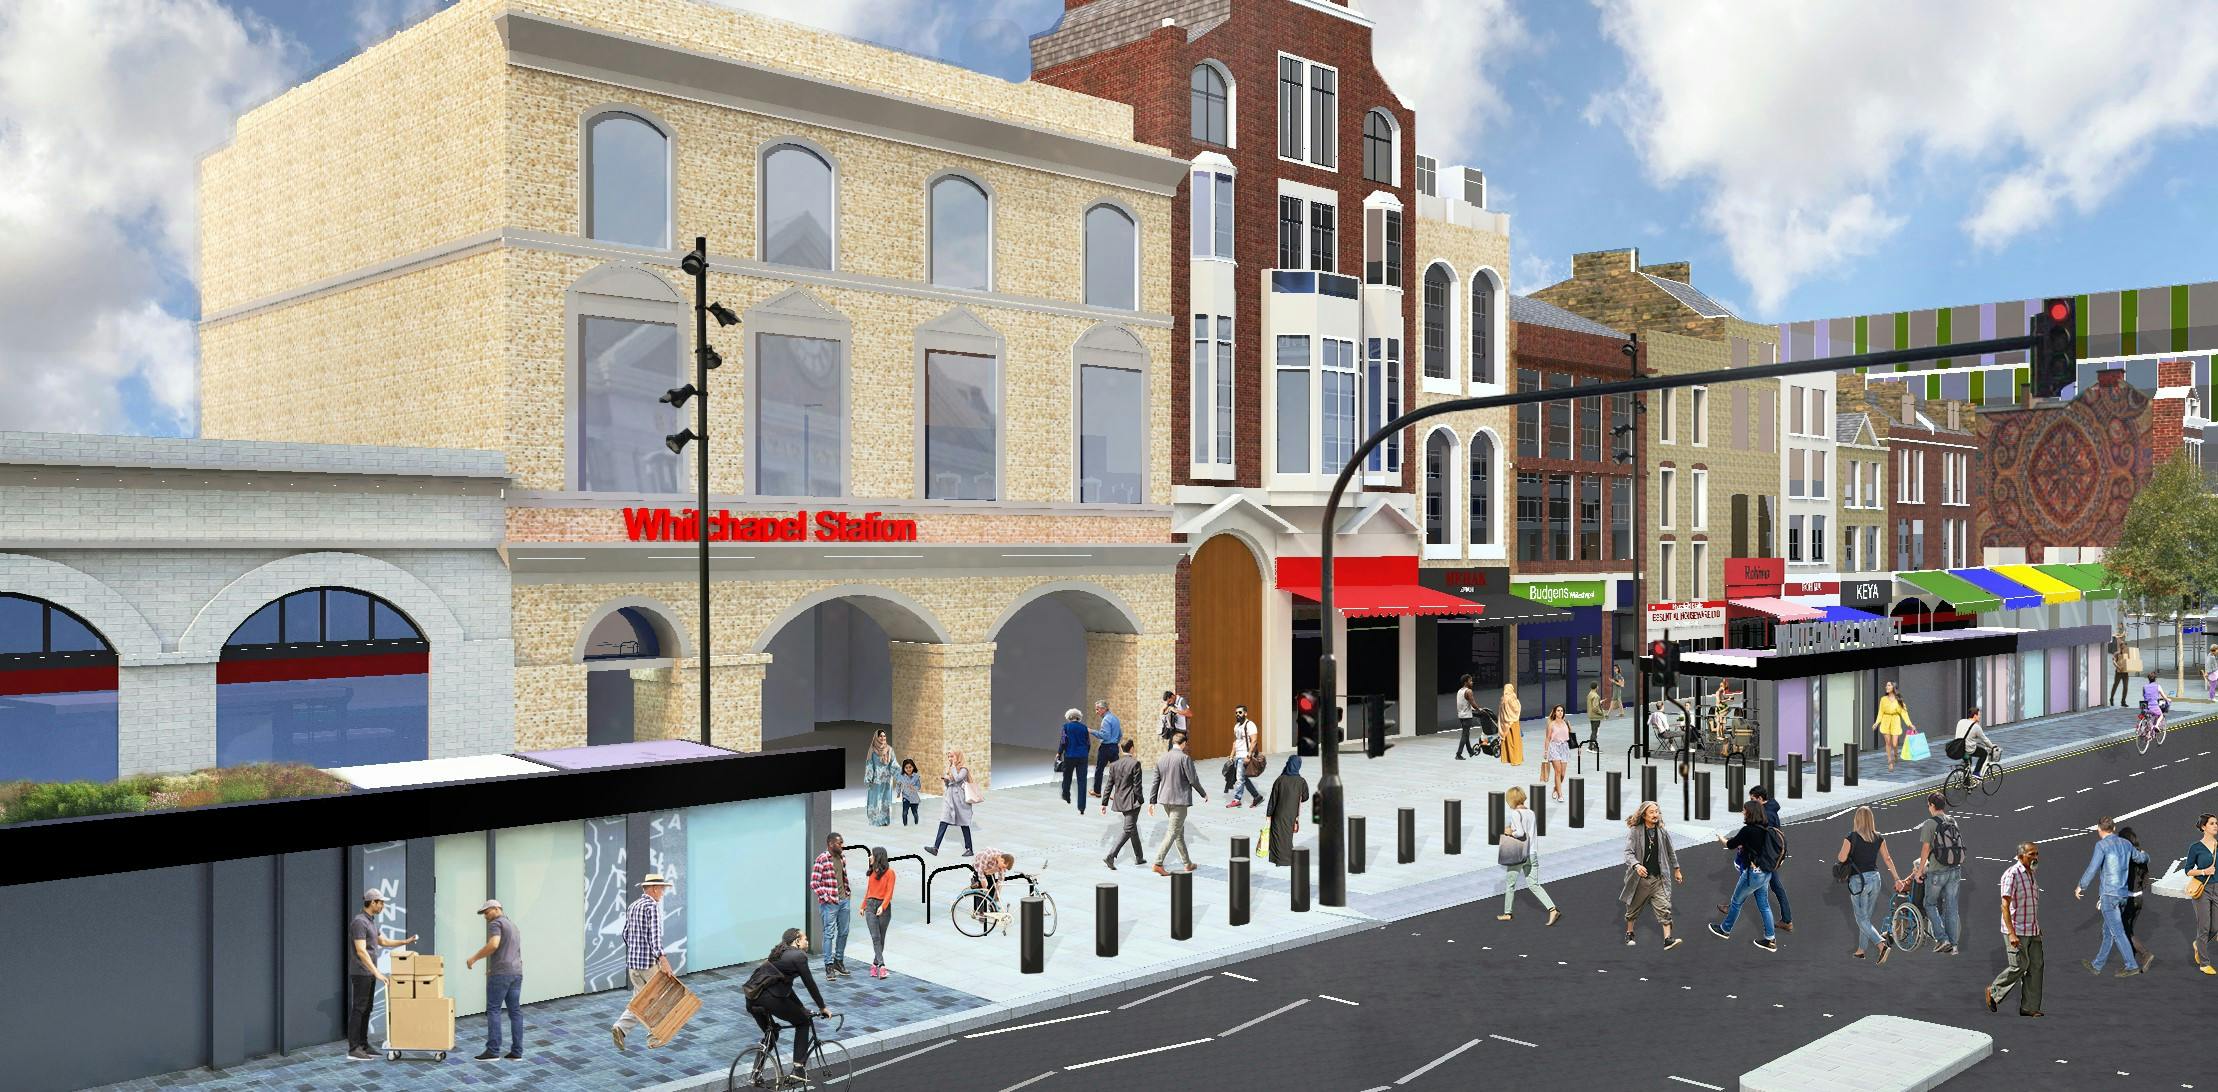 Proposed view looking north towards Whitechapel Station.jpg